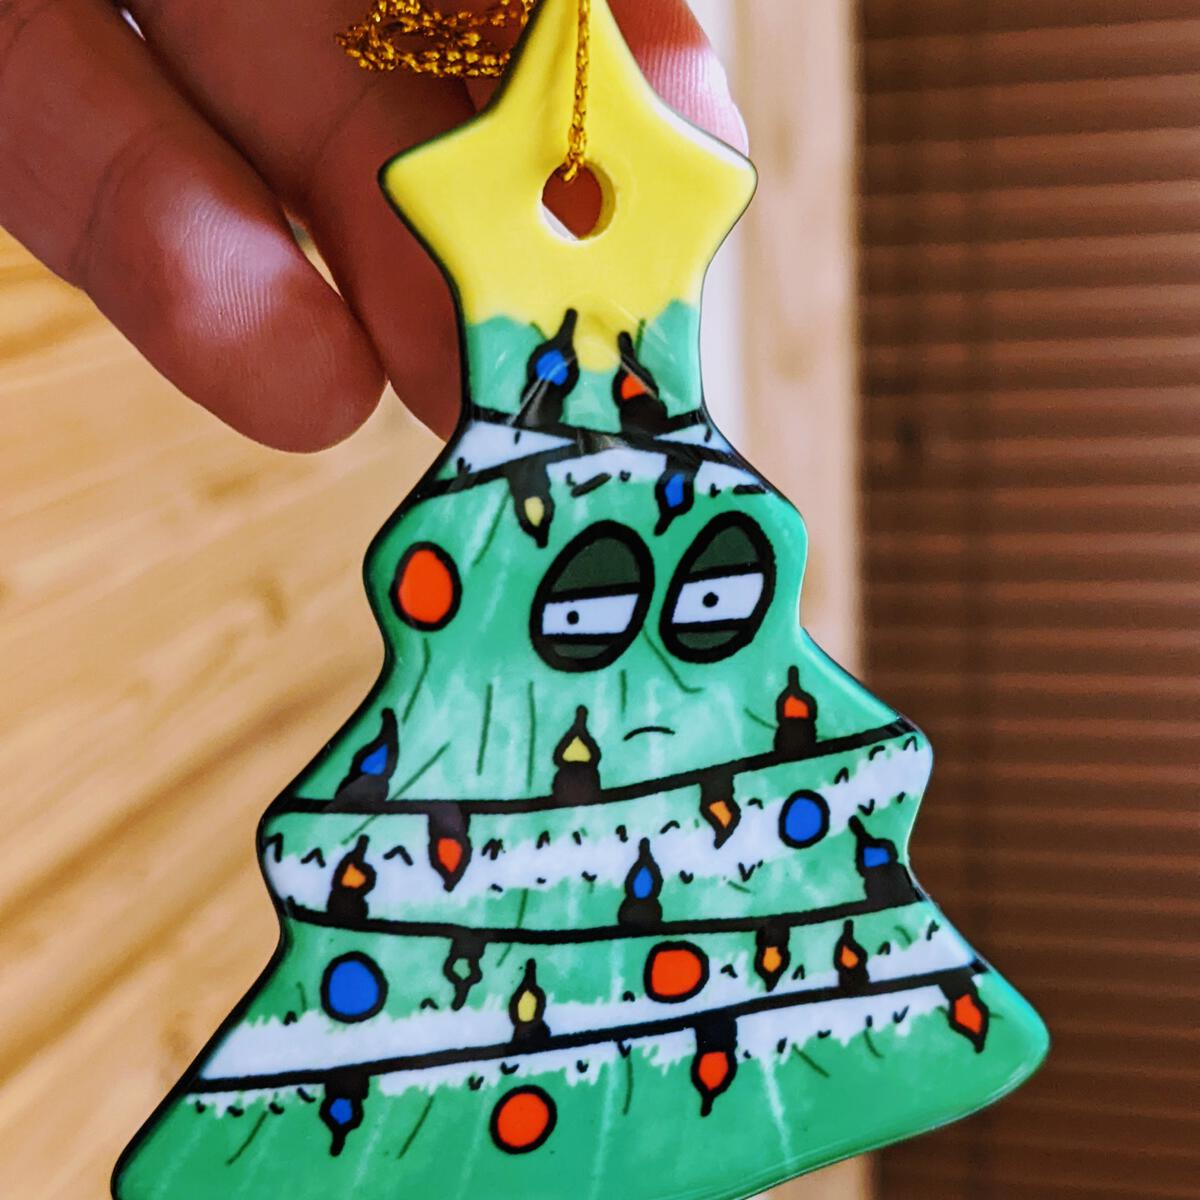 Gaudy Christmas Tree Ornament 2021 Featured